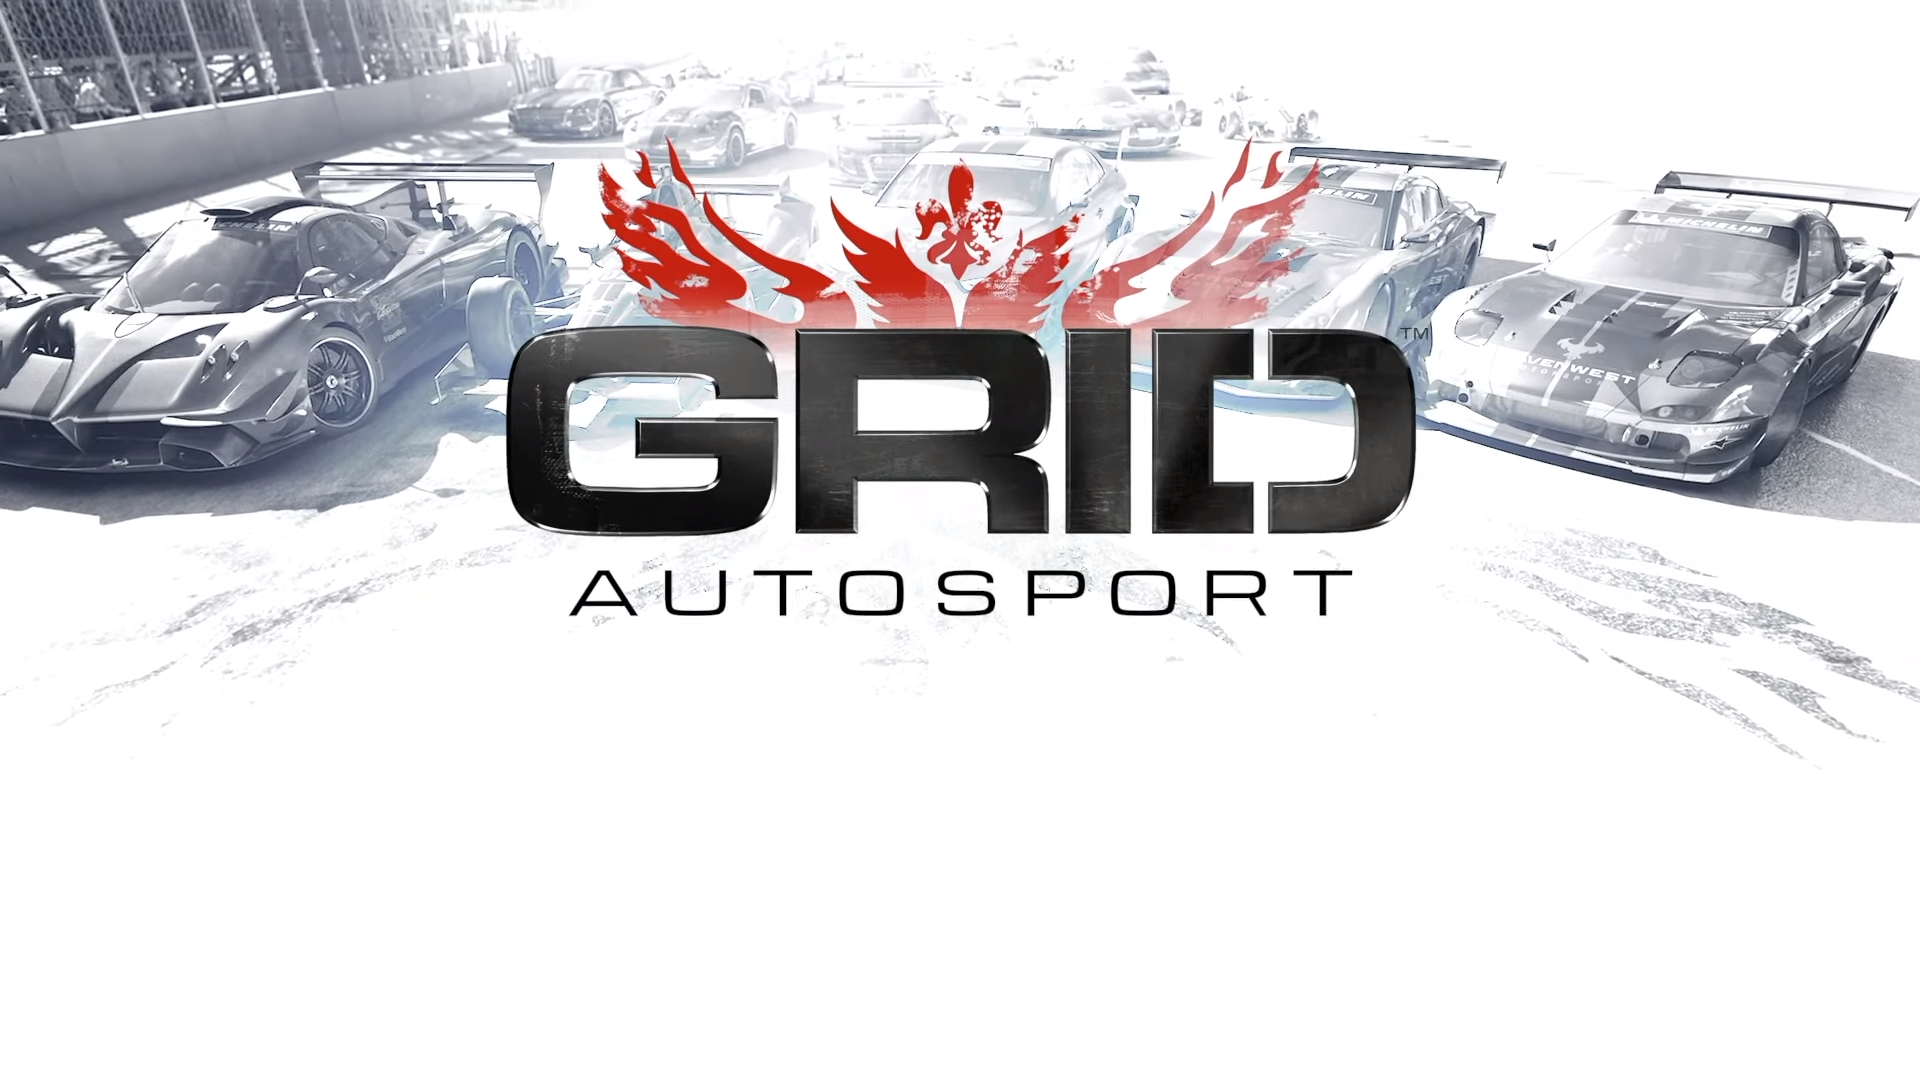 GRID™ Autosport for mobile - Requirements